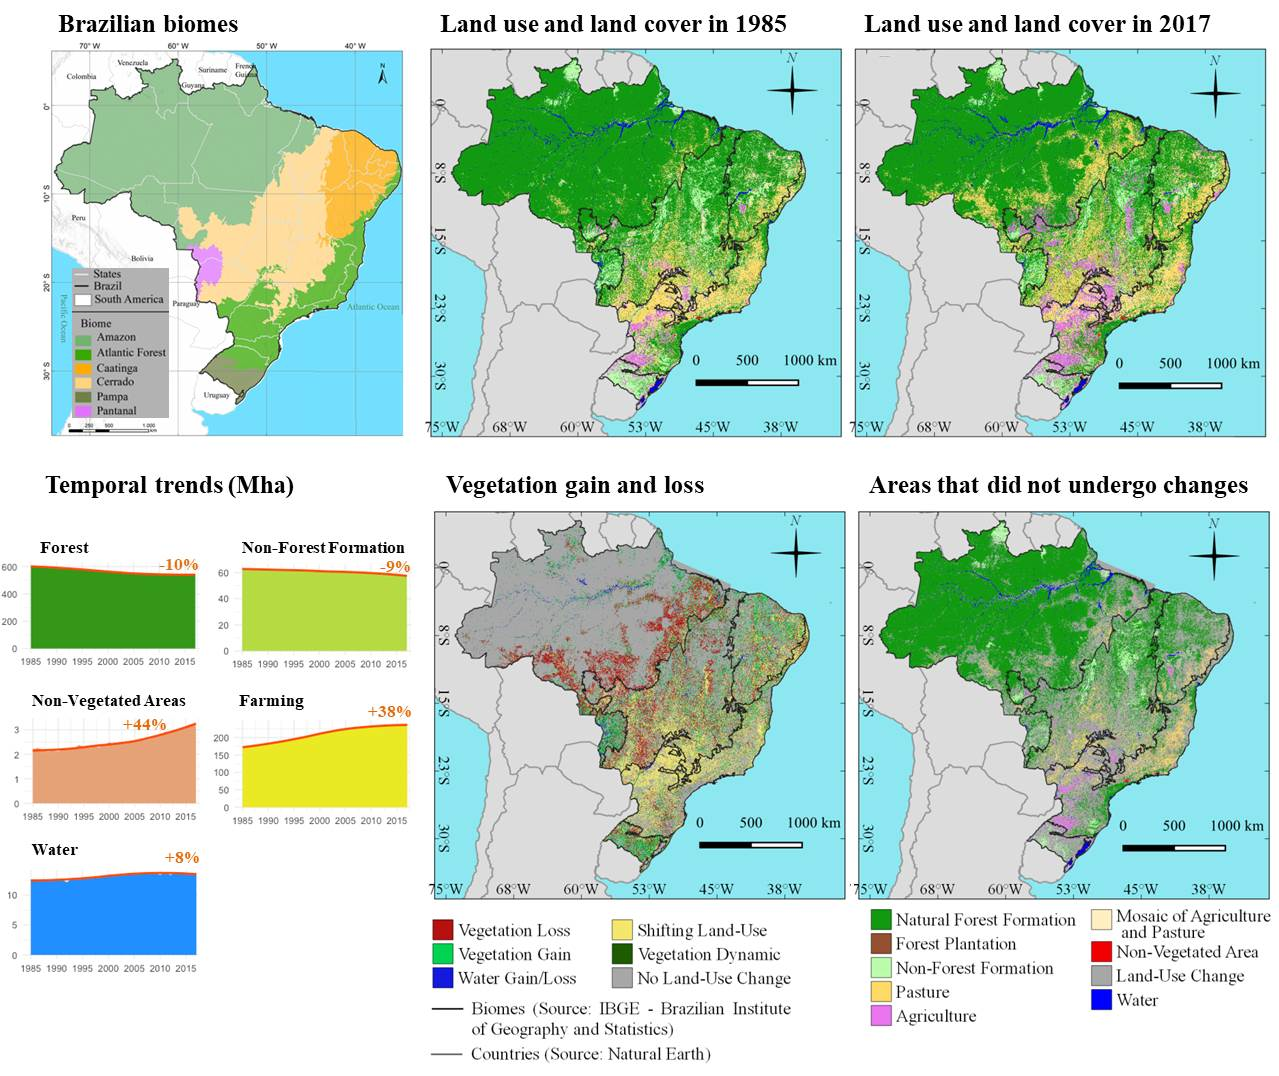 Testing Distant Waters: Walmart's Early Years in Brazil, 1995–2002